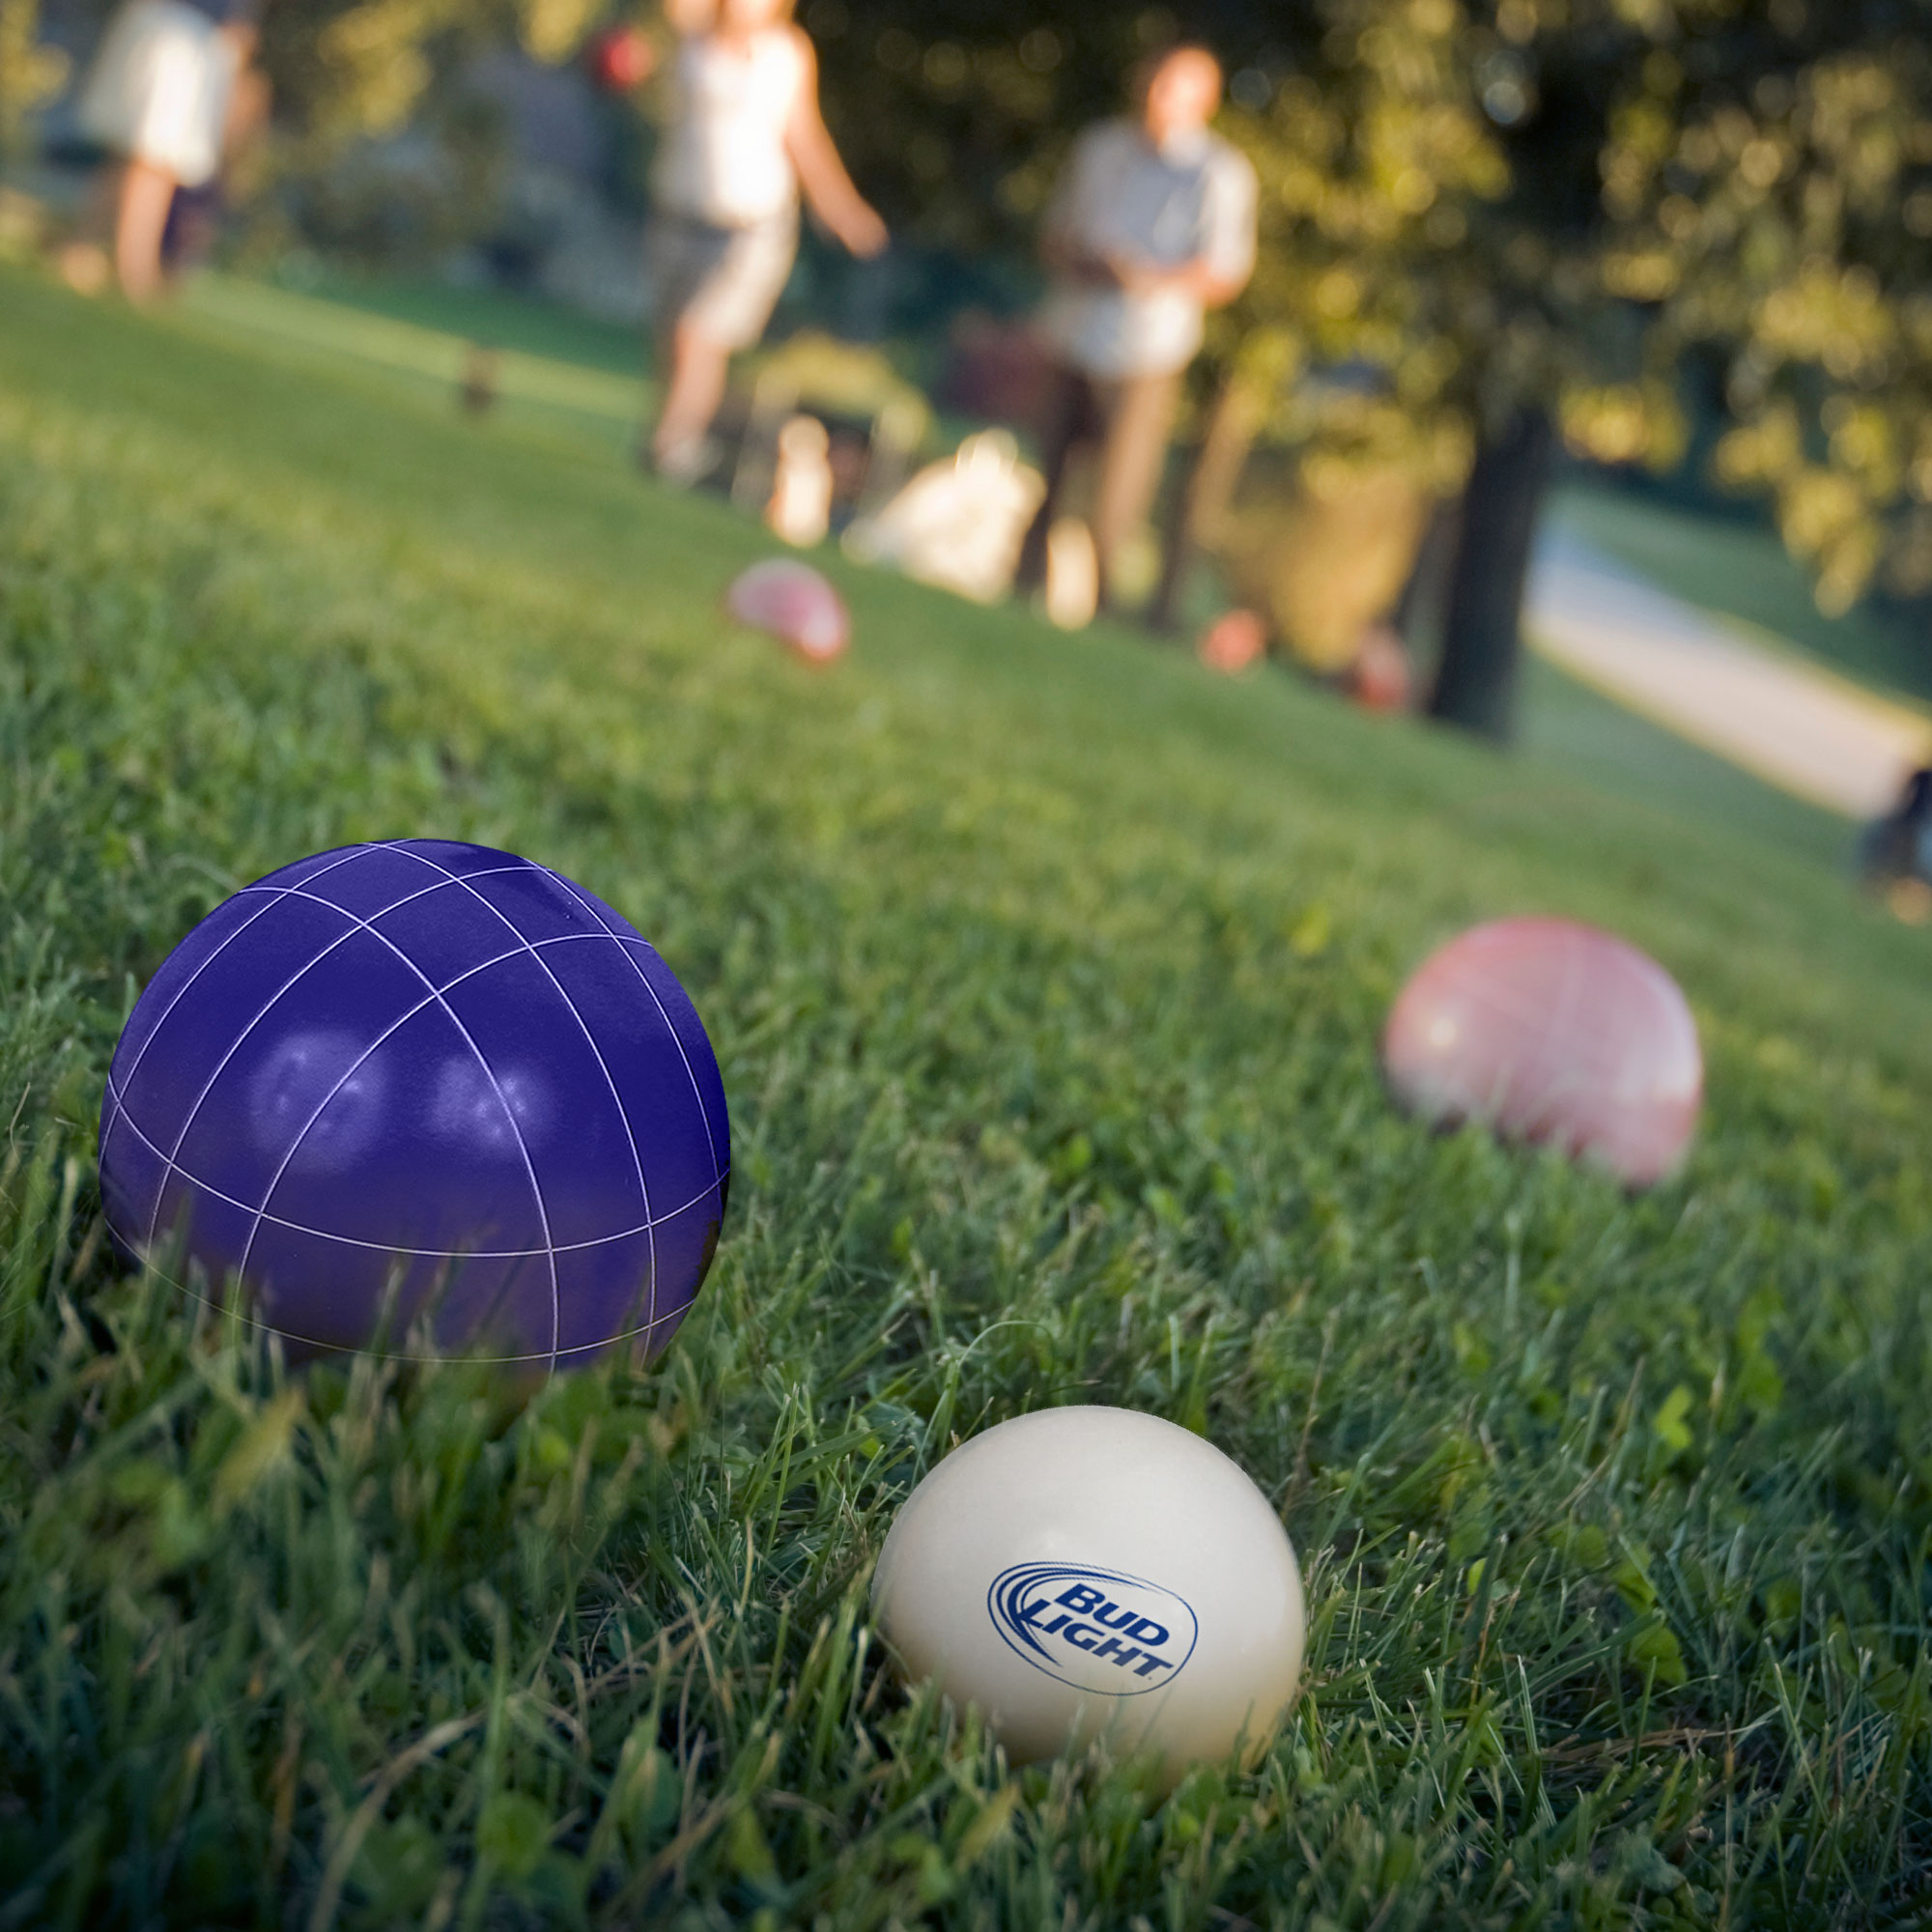 Bocce Ball Set- Regulation Outdoor Family Bocce Game and Carrying Case by Hey! Play! (Bud Light) - image 1 of 2